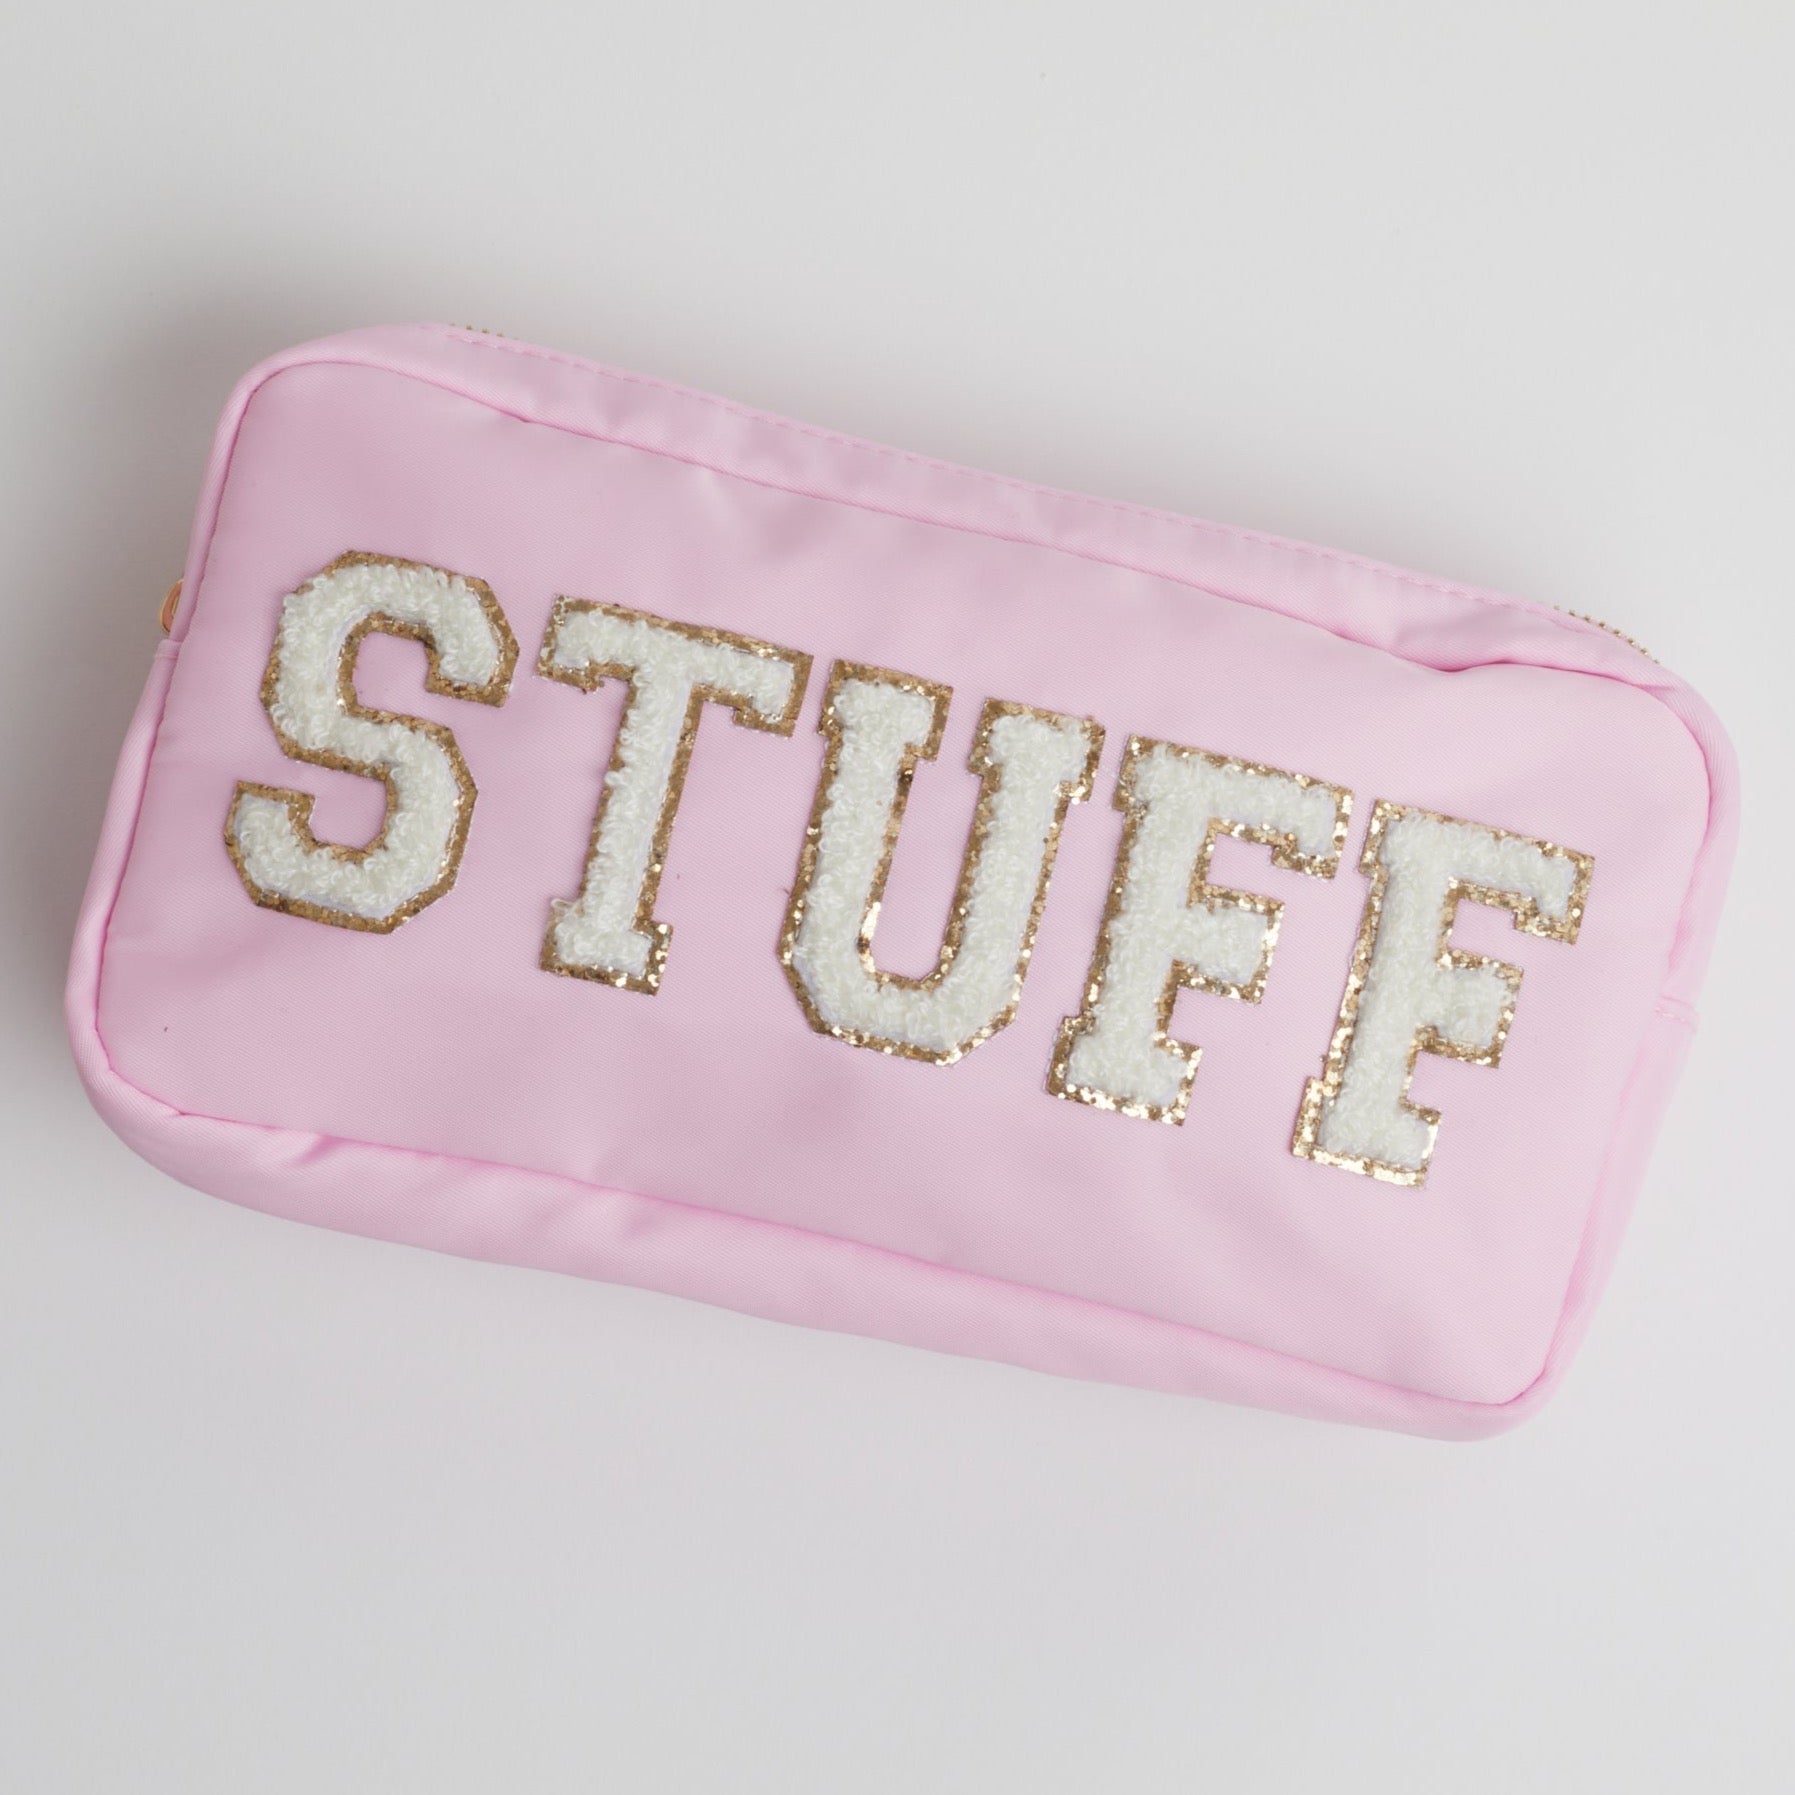 A pink cosmetic bag with white terry cloth letters spelling out &quot;STUFF&quot; on a white background.